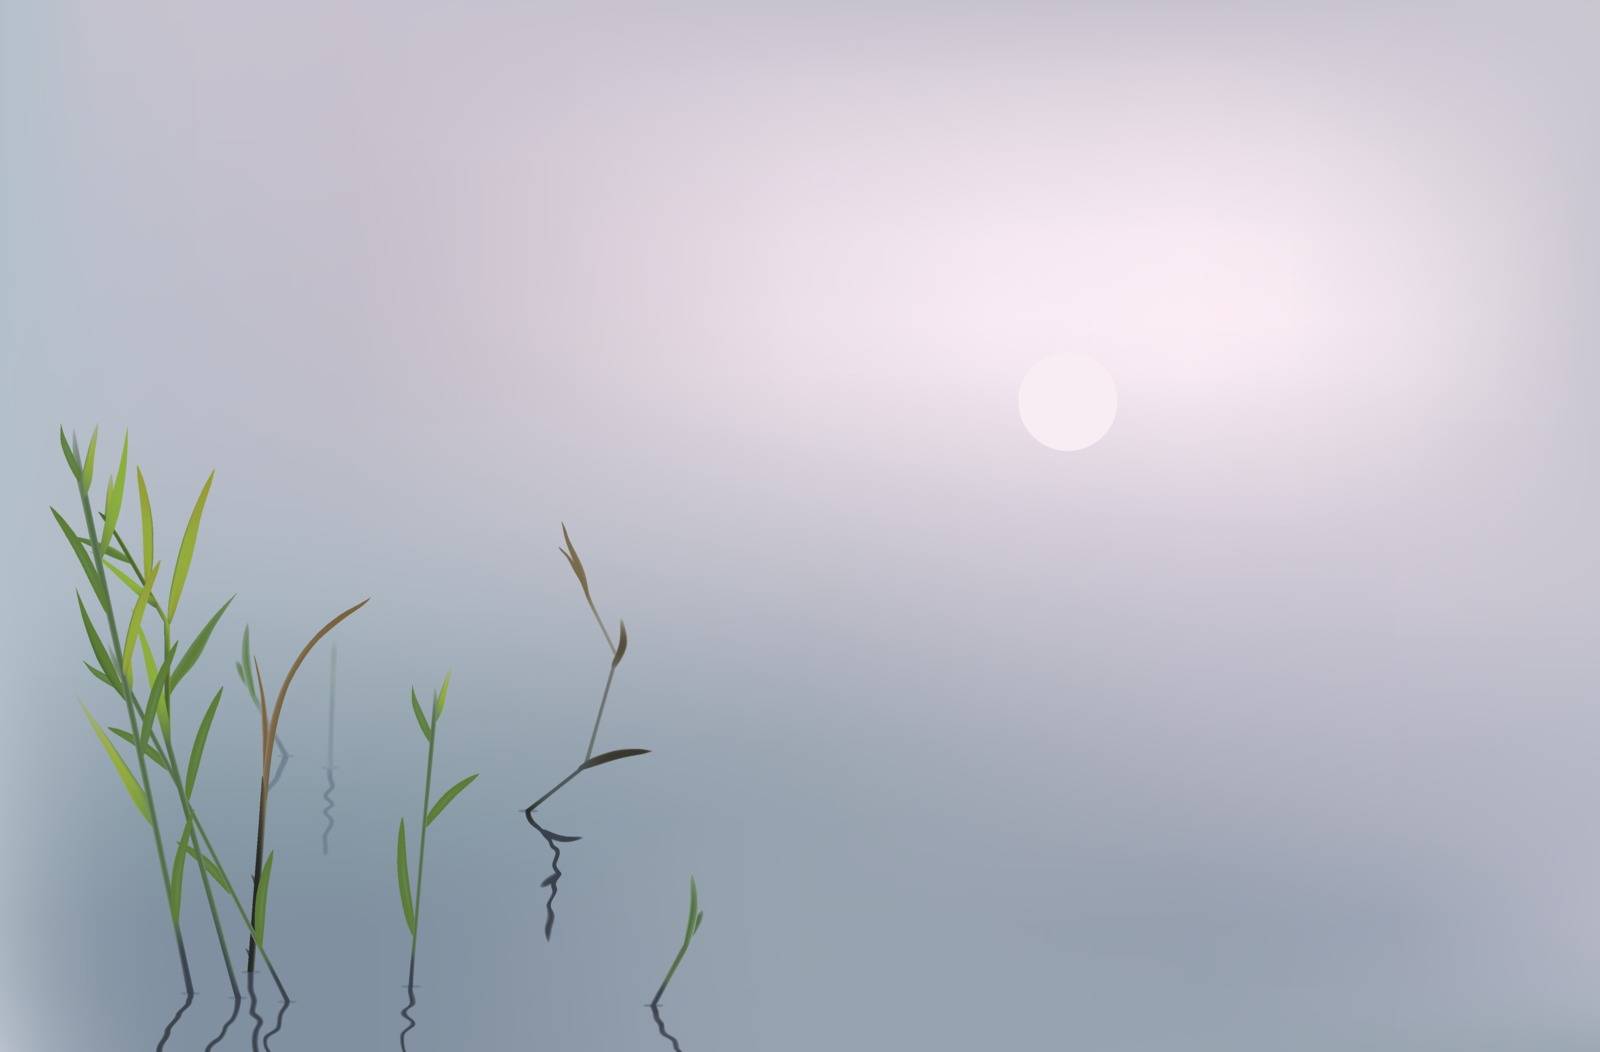 Foggy morning on a river or a lake - blurry landscape background with bulrush and copy space.